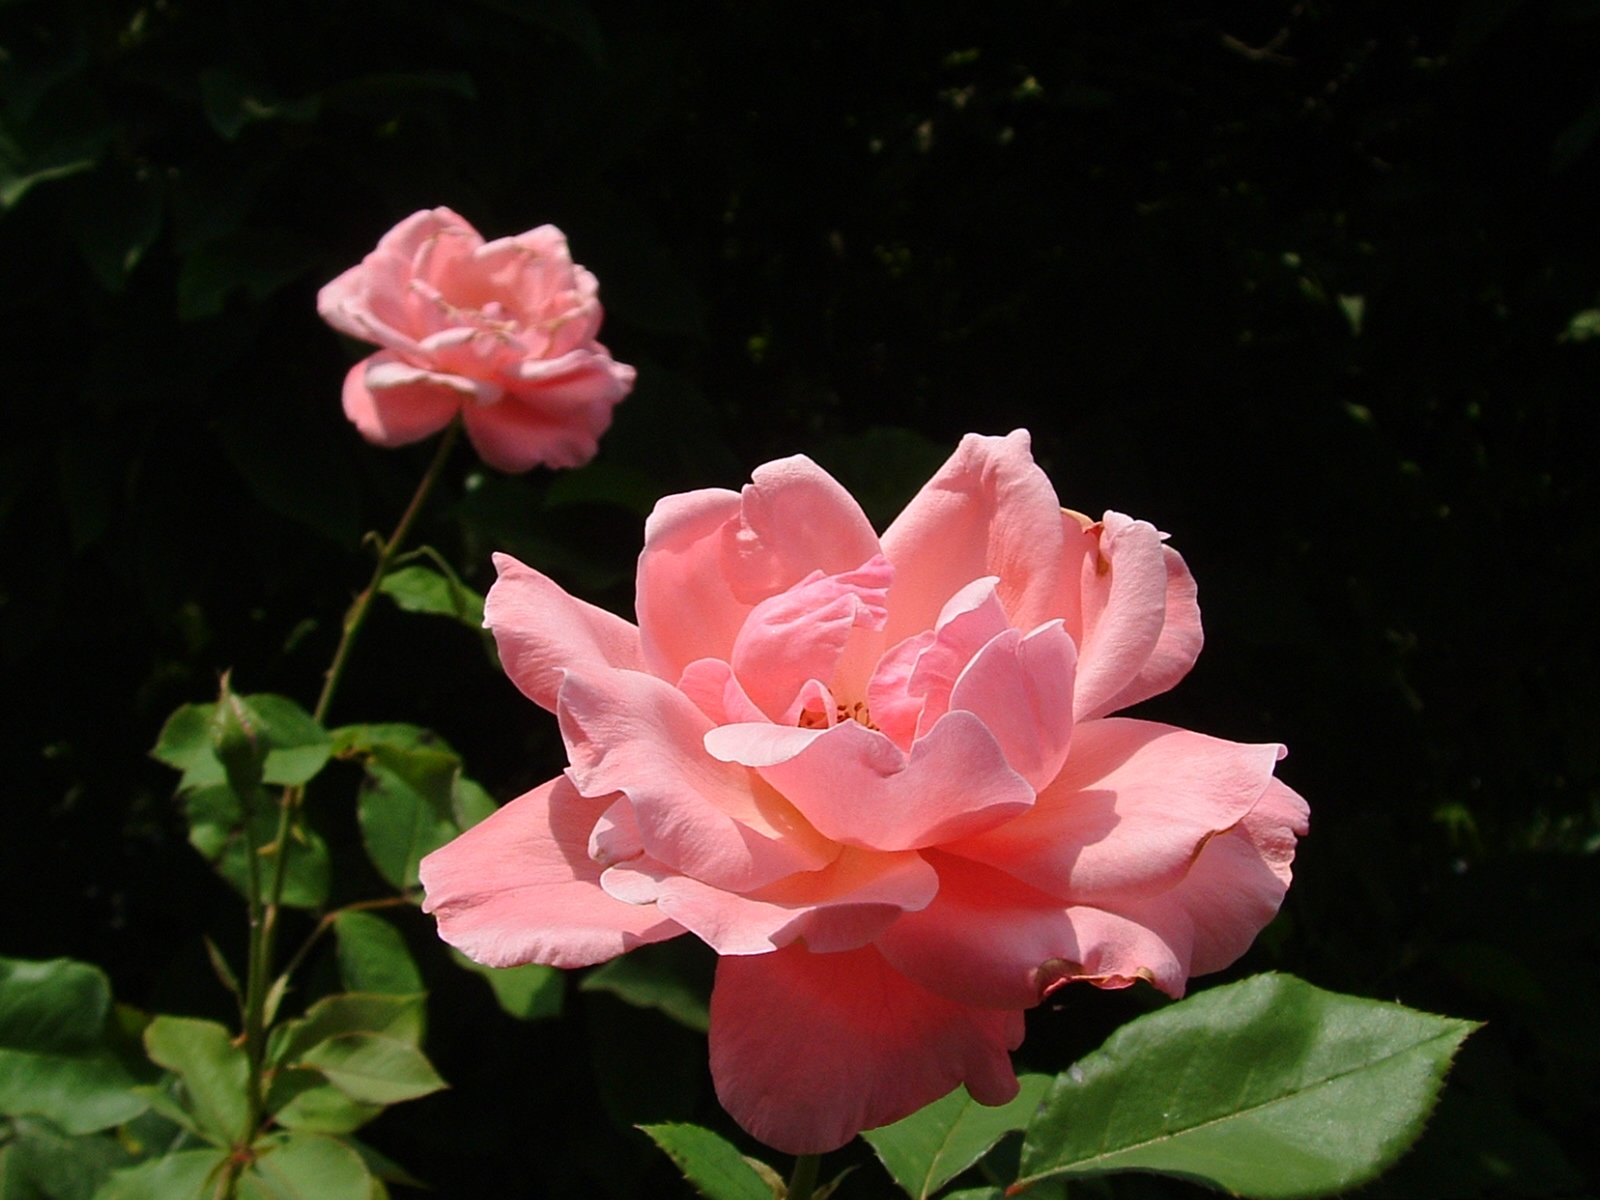 a single pink rose with buds still in flower